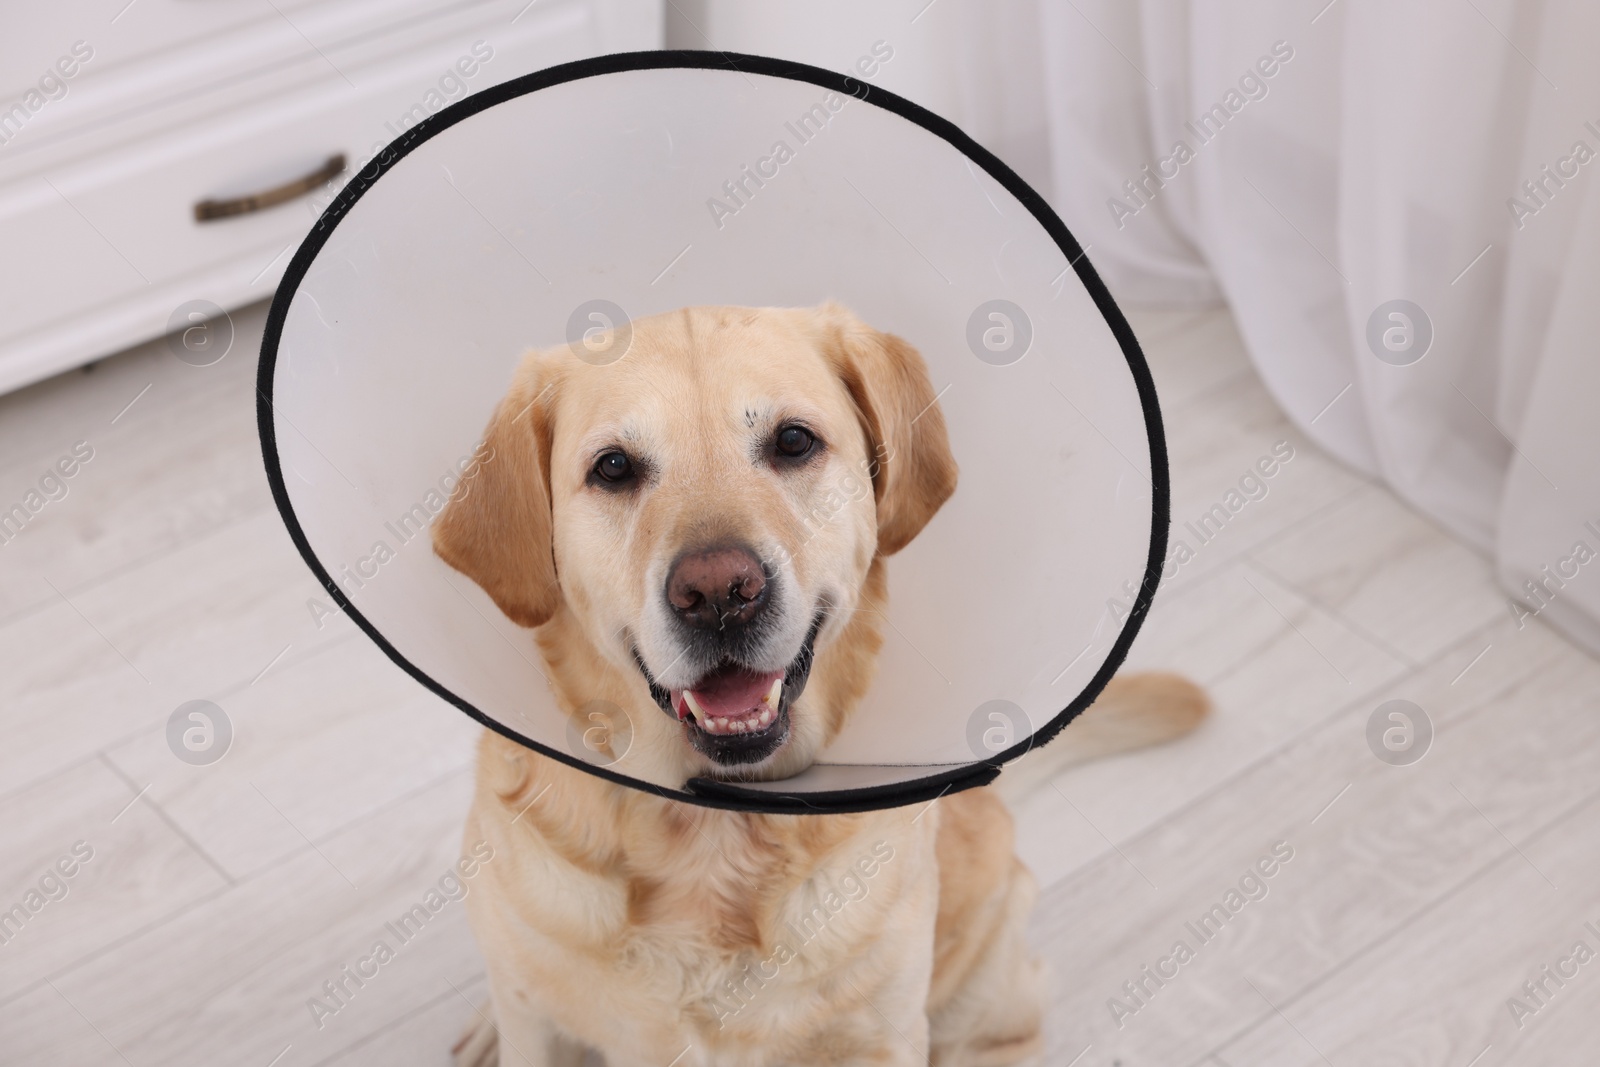 Photo of Cute Labrador Retriever with protective cone collar in room, above view